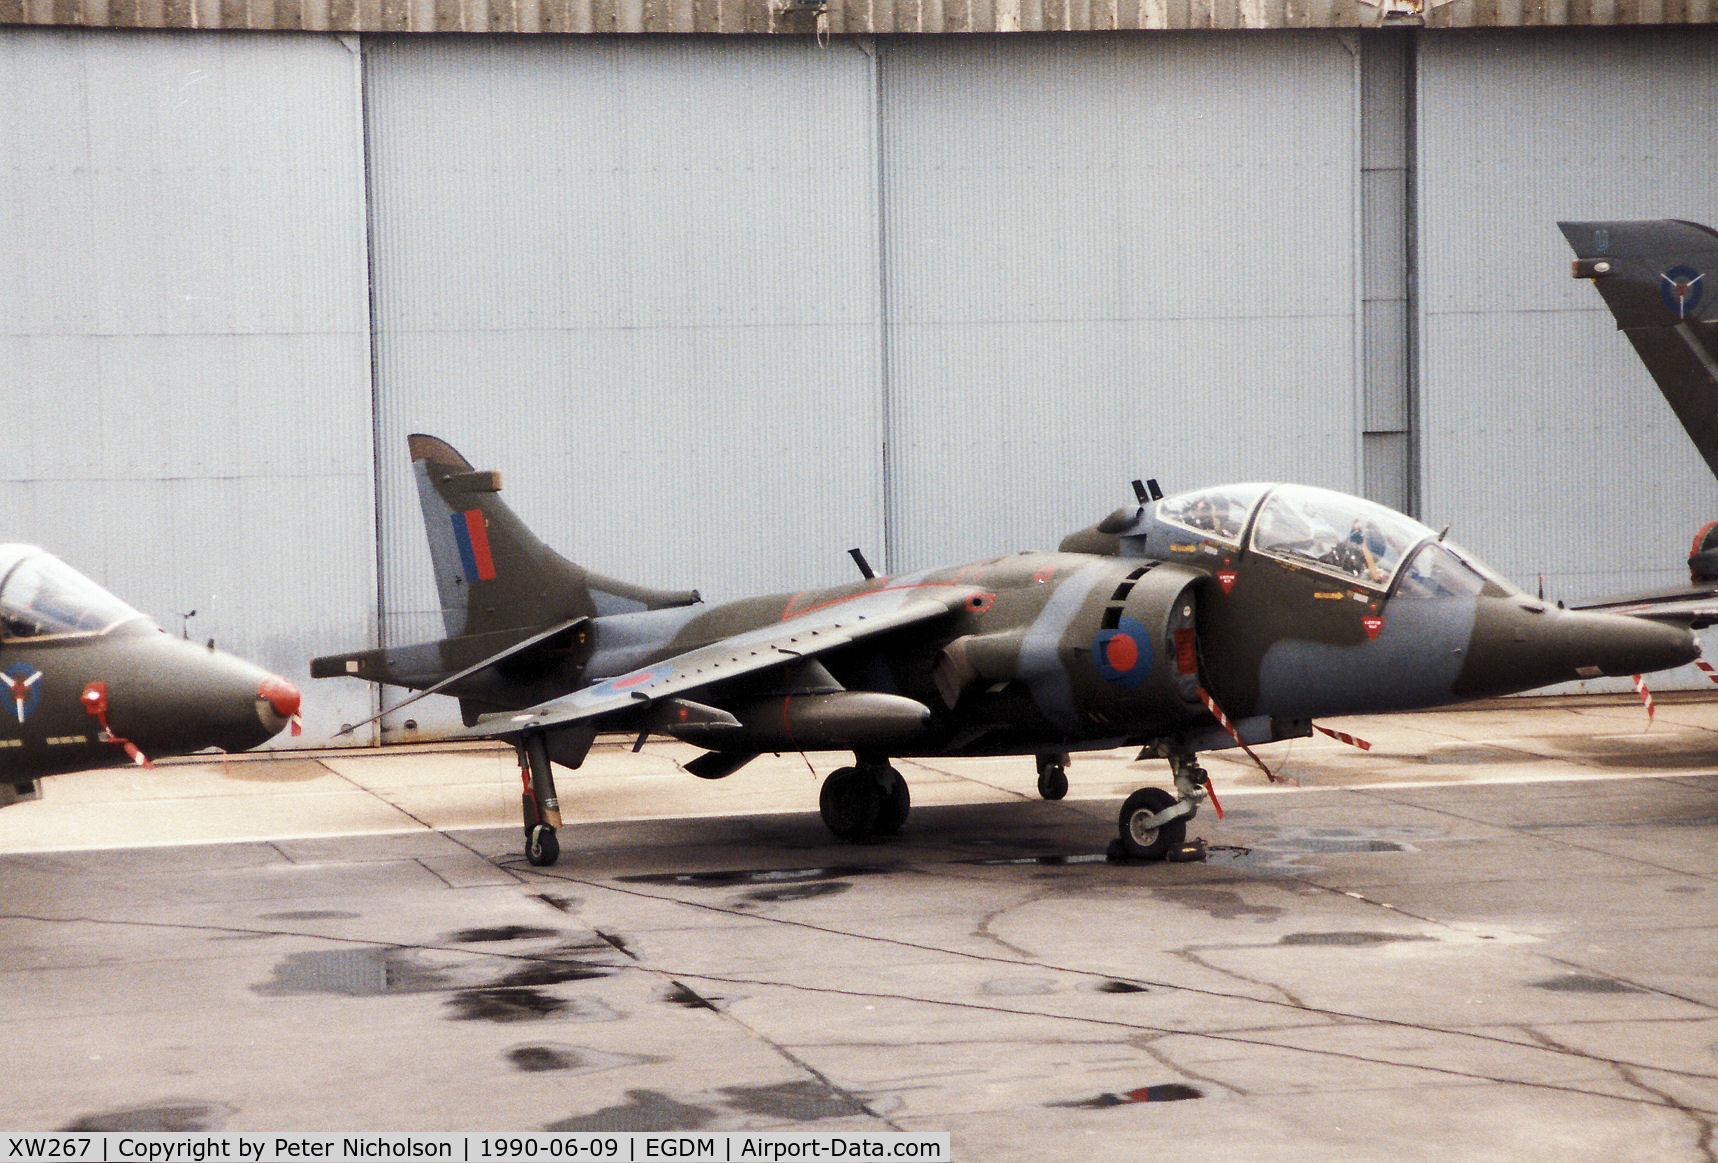 XW267, 1970 Hawker Siddeley Harrier T.4 C/N 212006, Harrier T.4 of SAOEU - the Strike Attack Operational Evaluation Unit - on the flight-line at the 1990 Boscombe Down Battle of Britain 50th Anniversary Airshow.